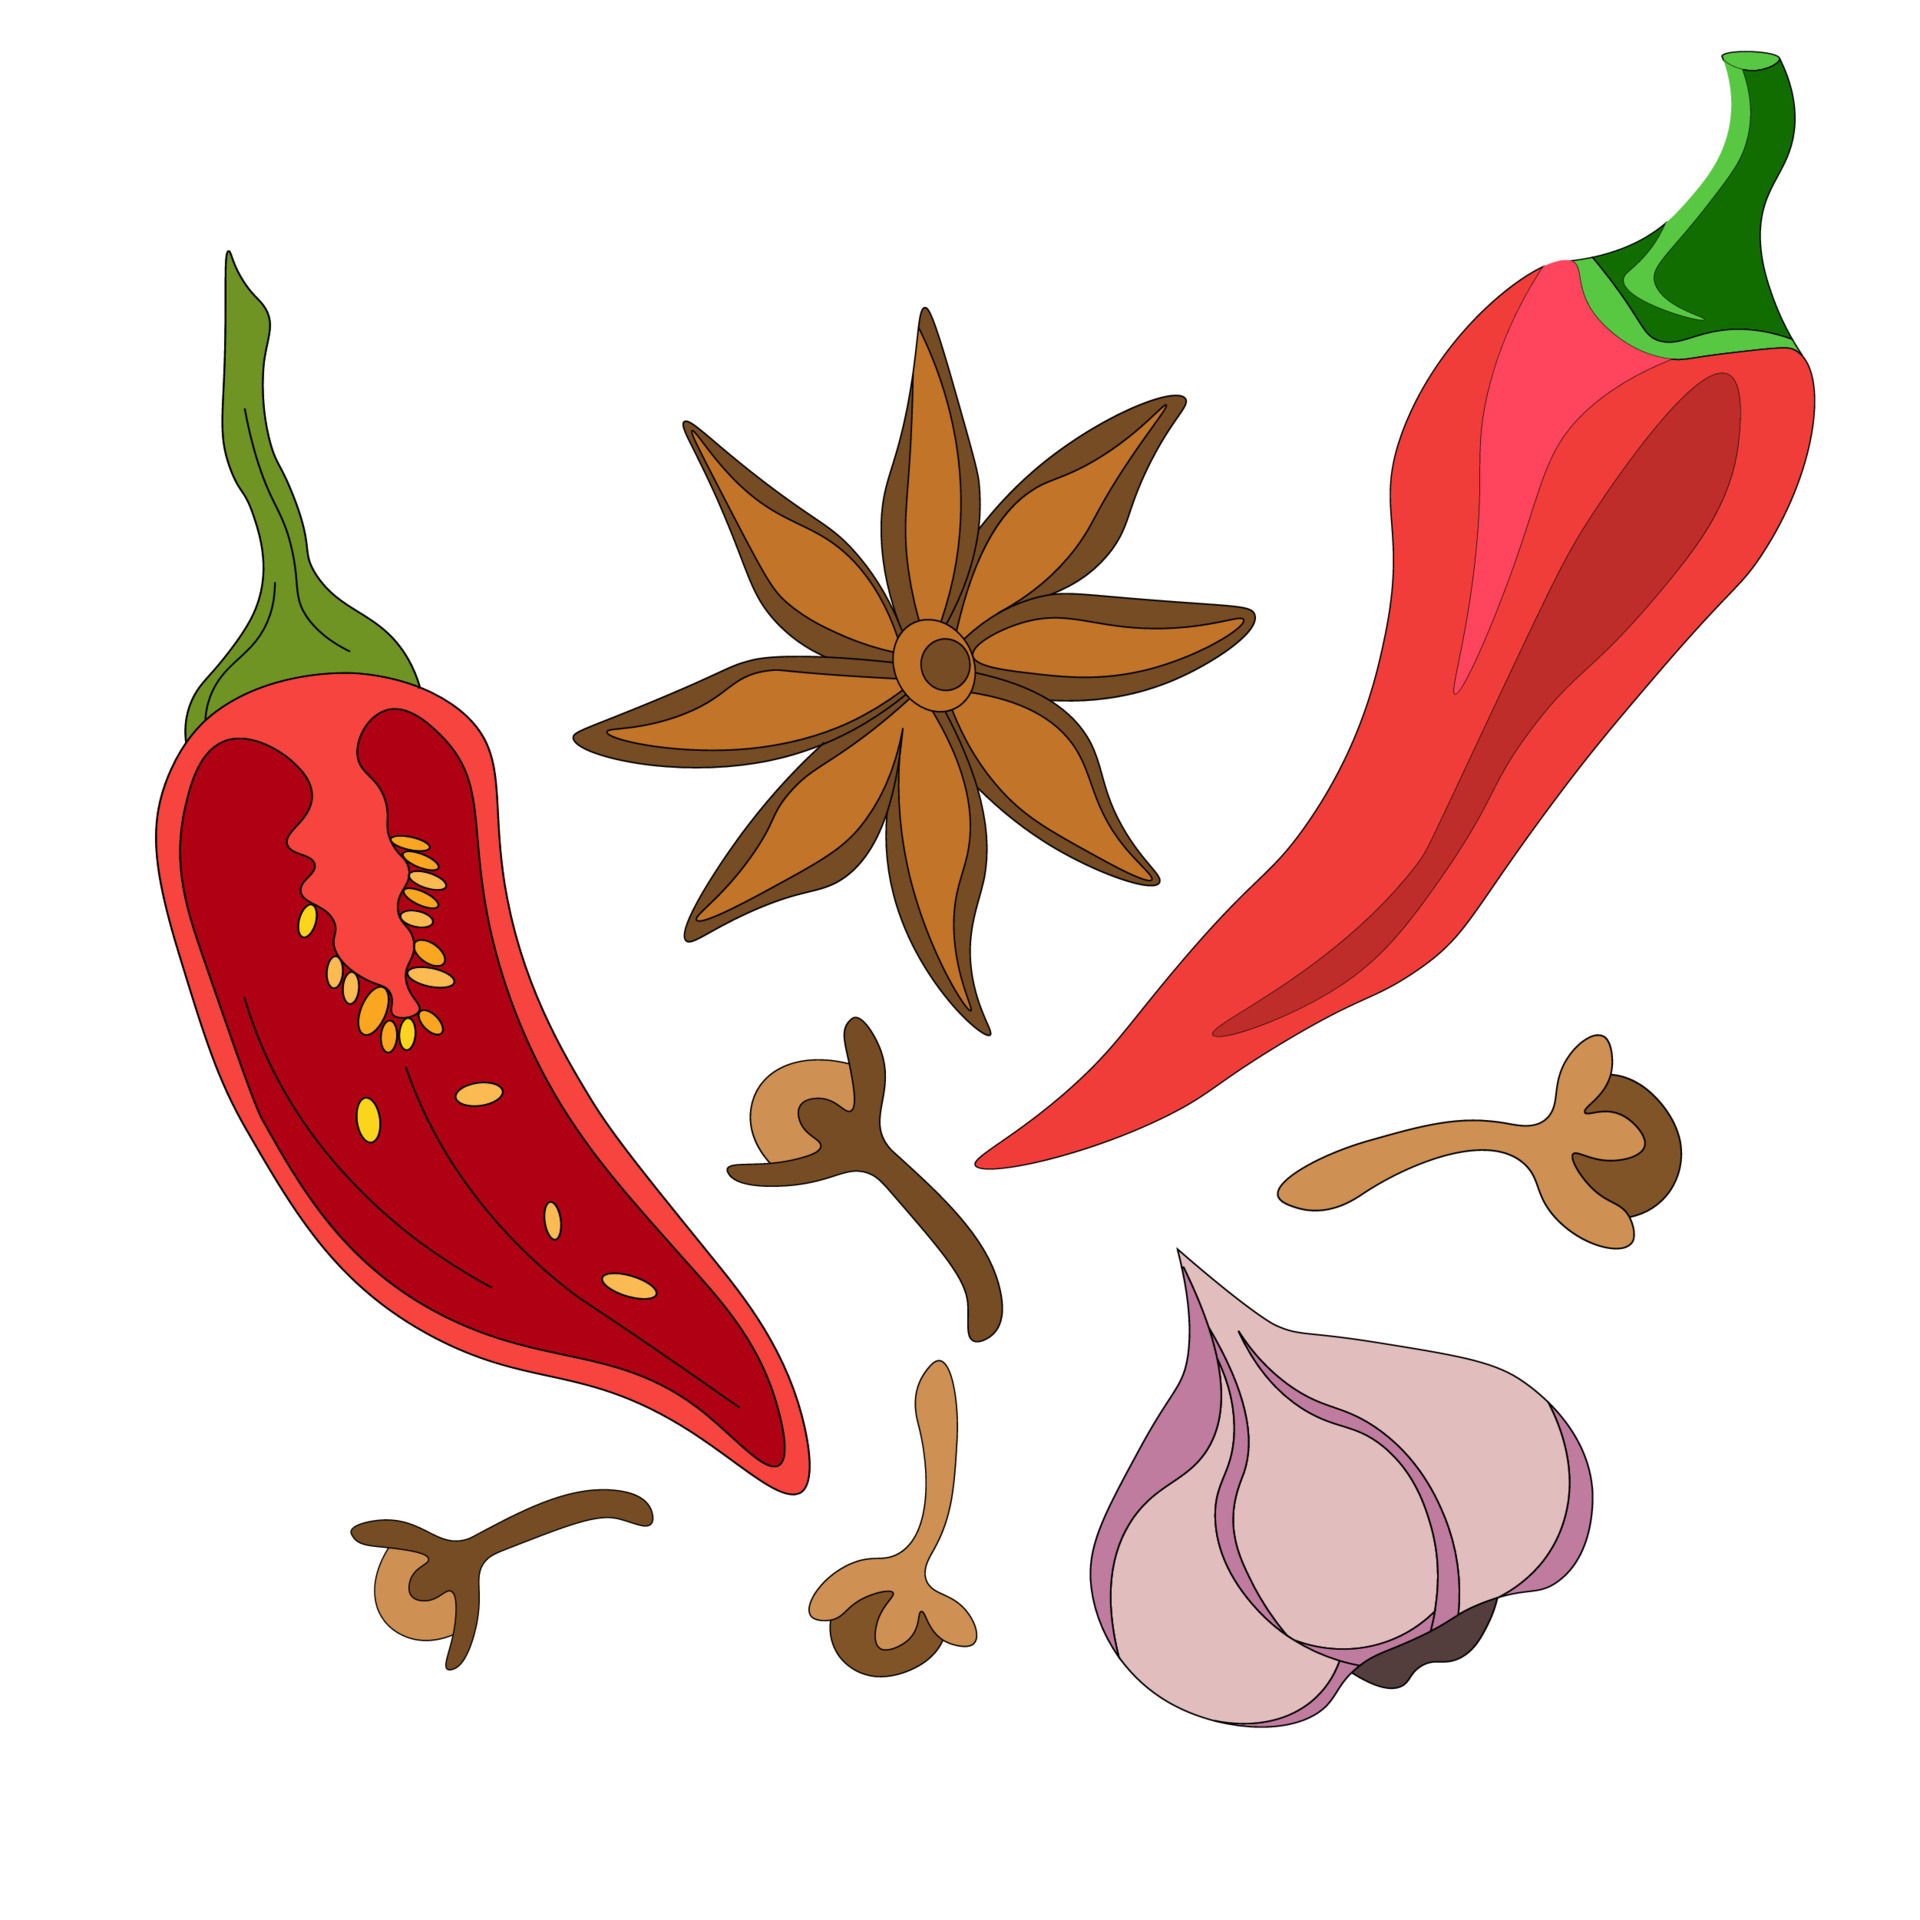 Red chili pepper, hot spice for food. set of spices - cloves, anise stars,  chili pepper, garlic. vector drawings in the doodle style. organic product  for farmer's market, farm design, local store